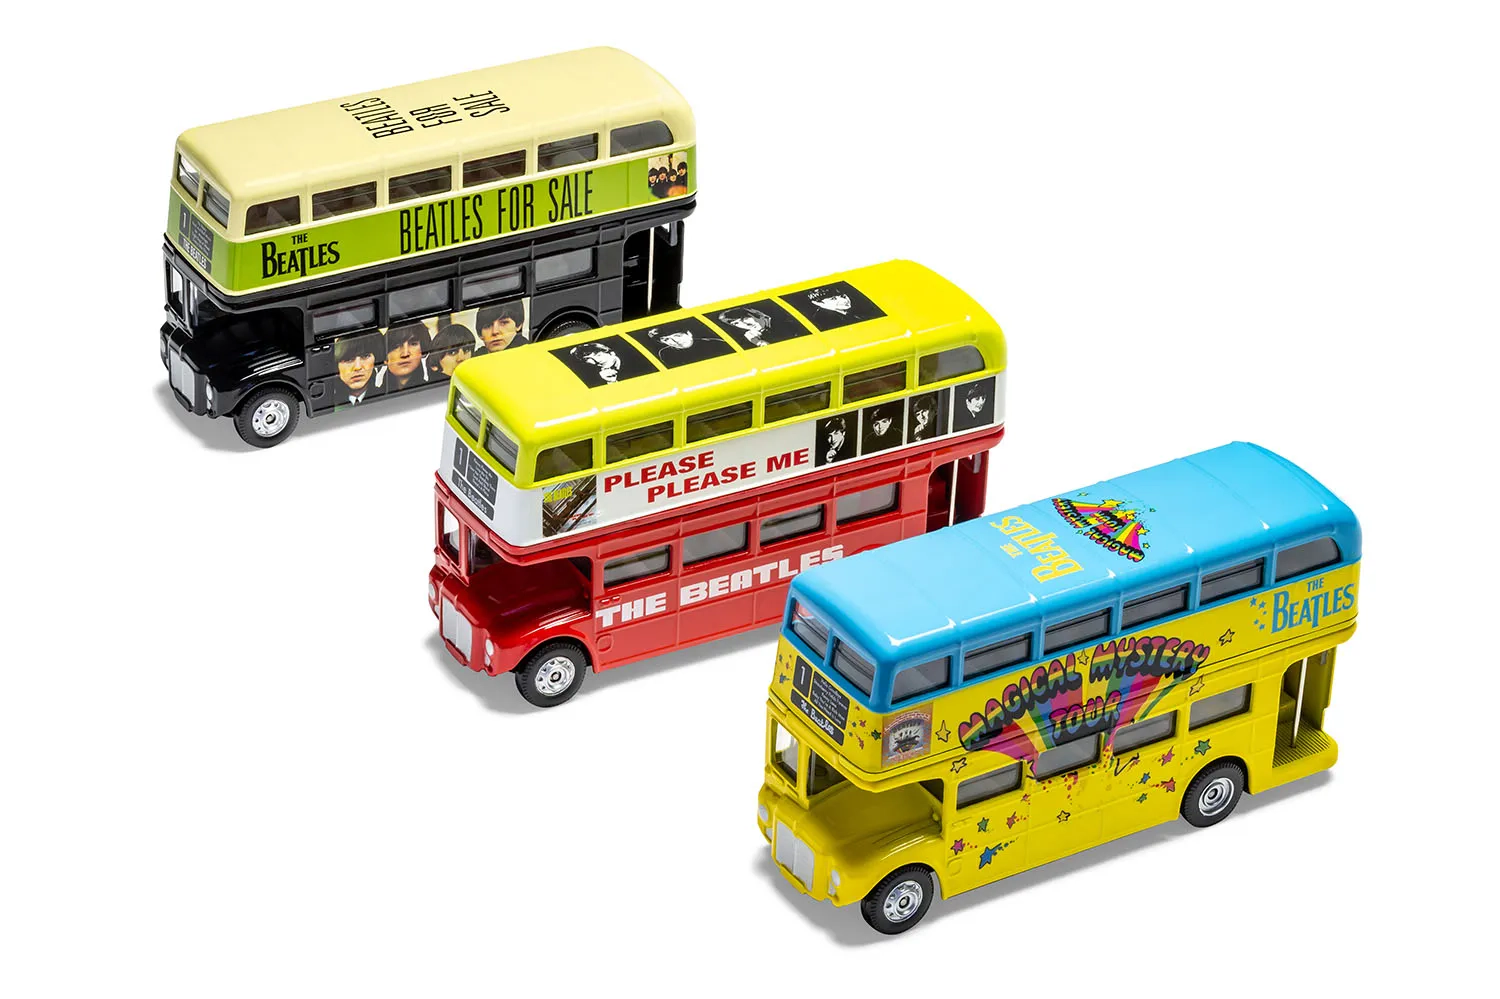 The Beatles - Series Two - Set of 3 Album Cover London Bus models